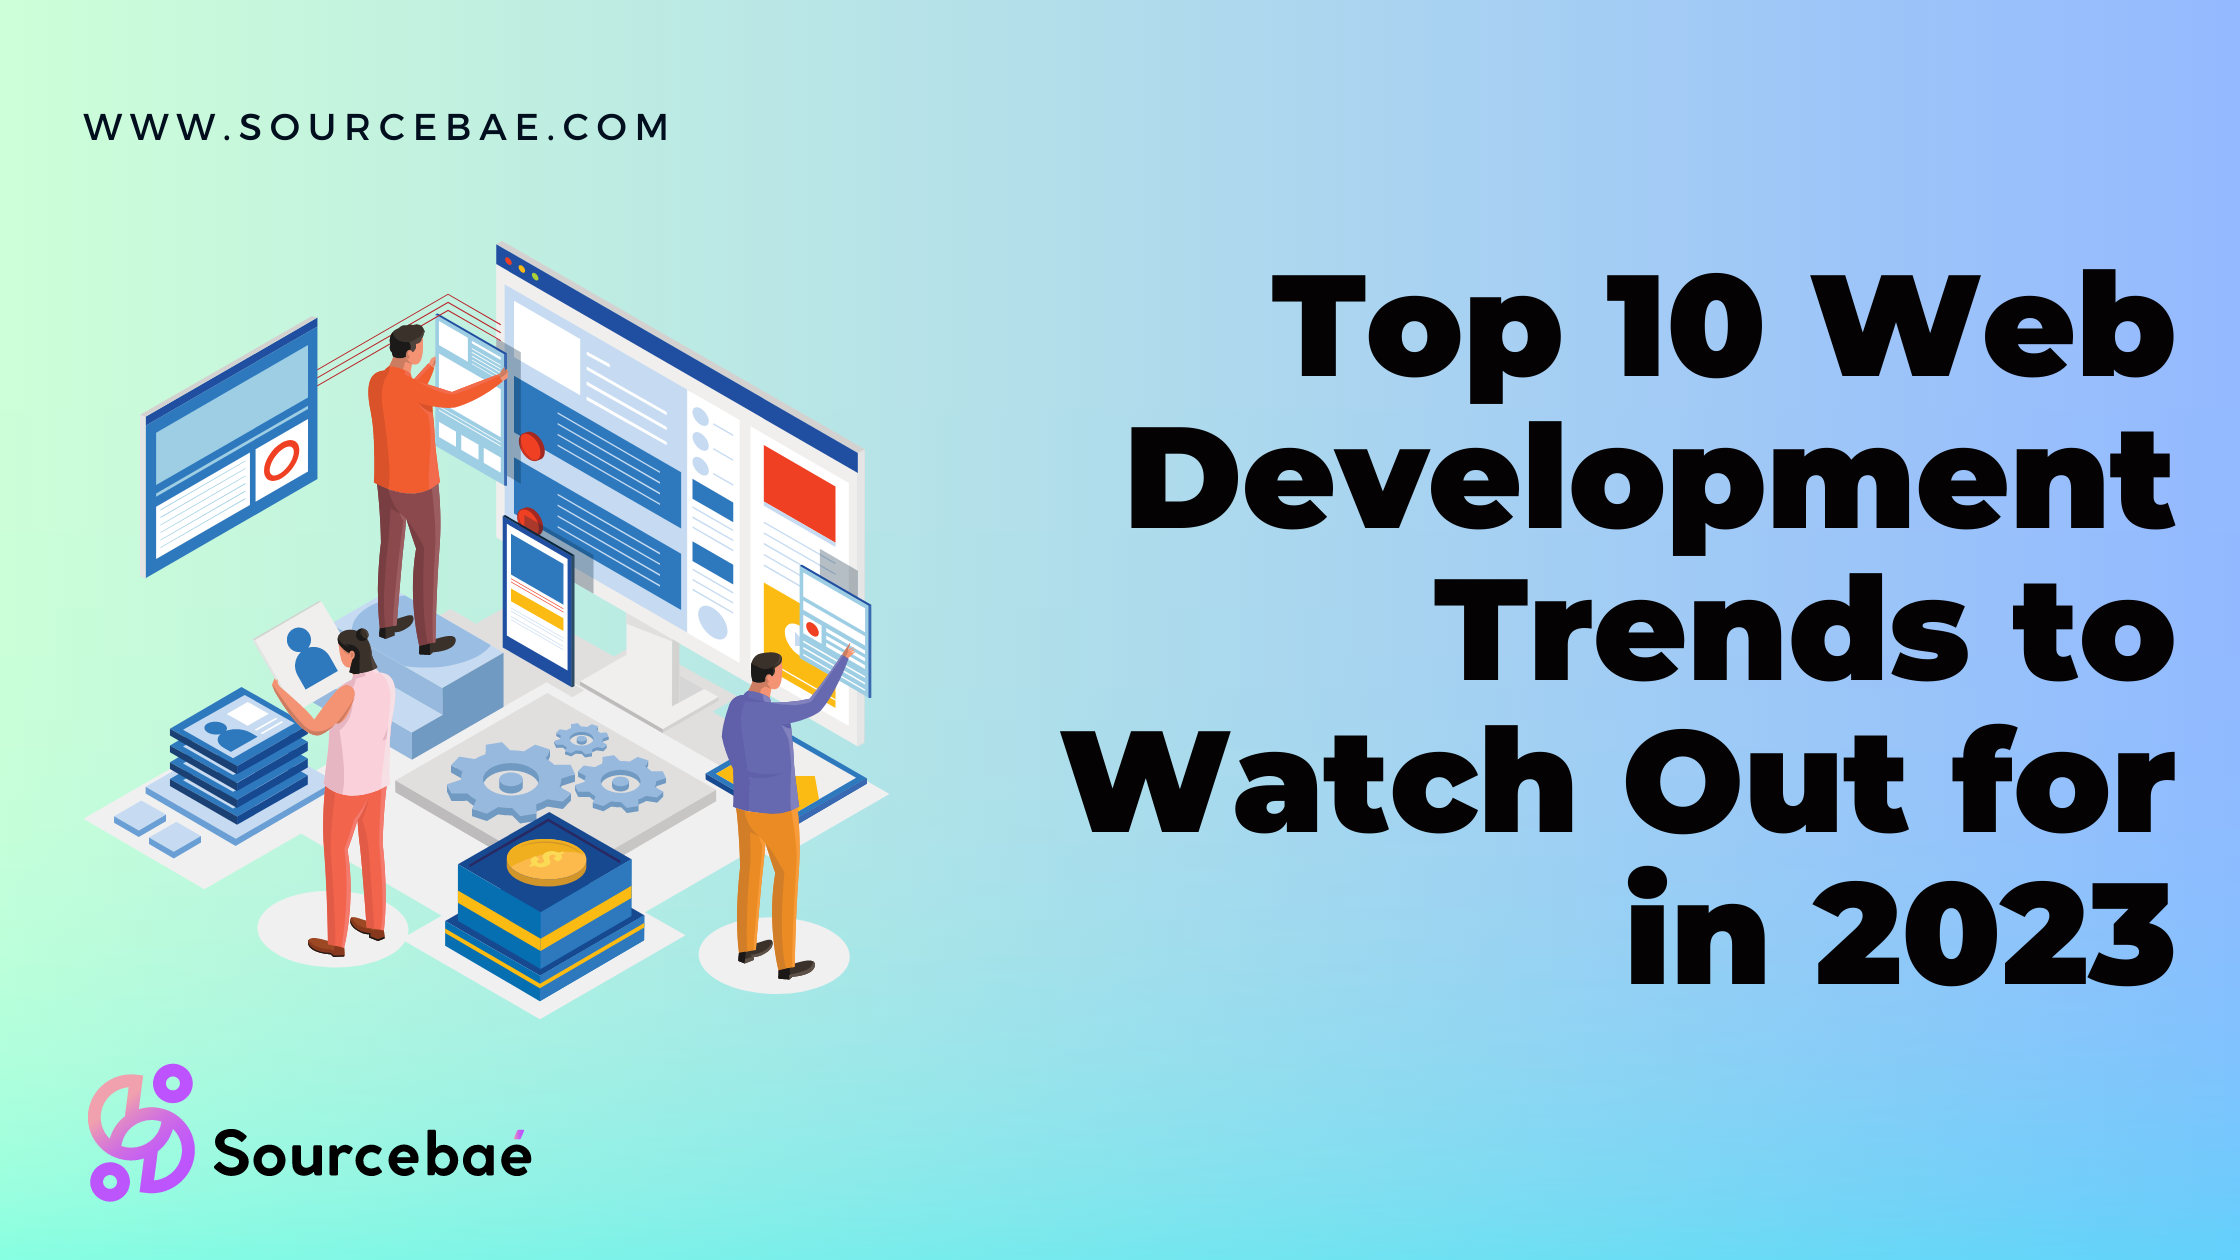 Top 10 Web Development Trends to Watch Out for in 2023